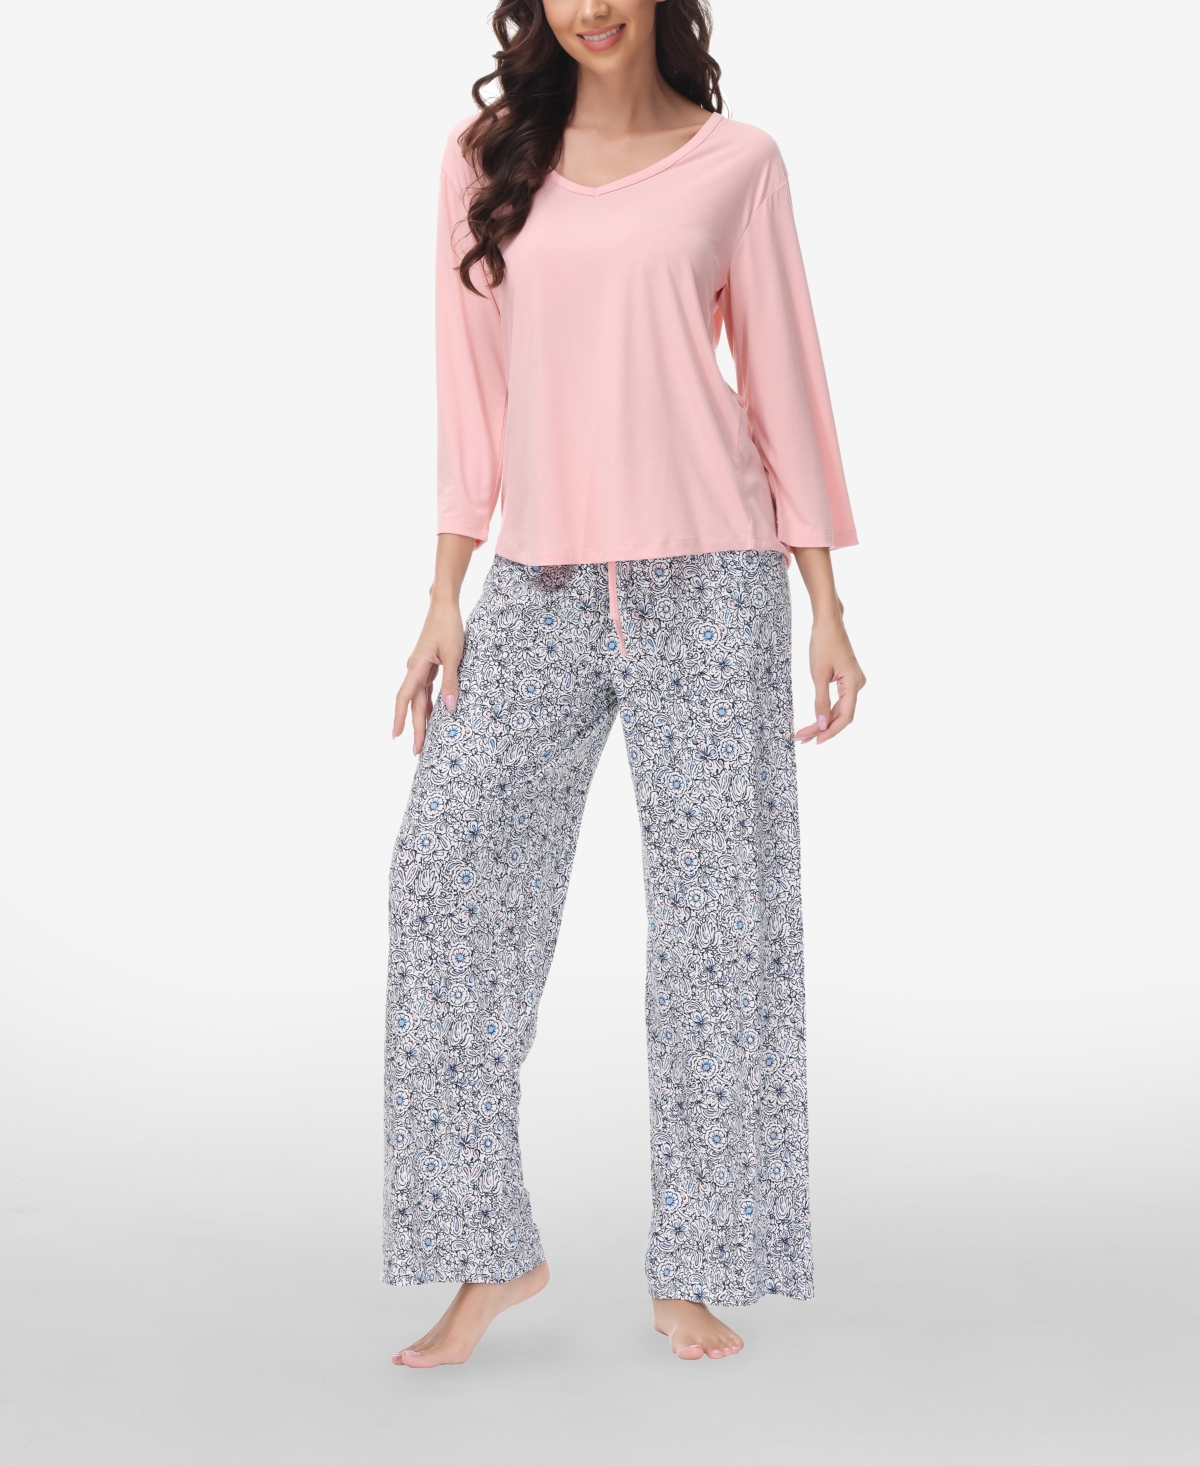 Ink+Ivy Women's Drop Sleeve Top with Wide Leg Lounge Pant Set, 2 Piece